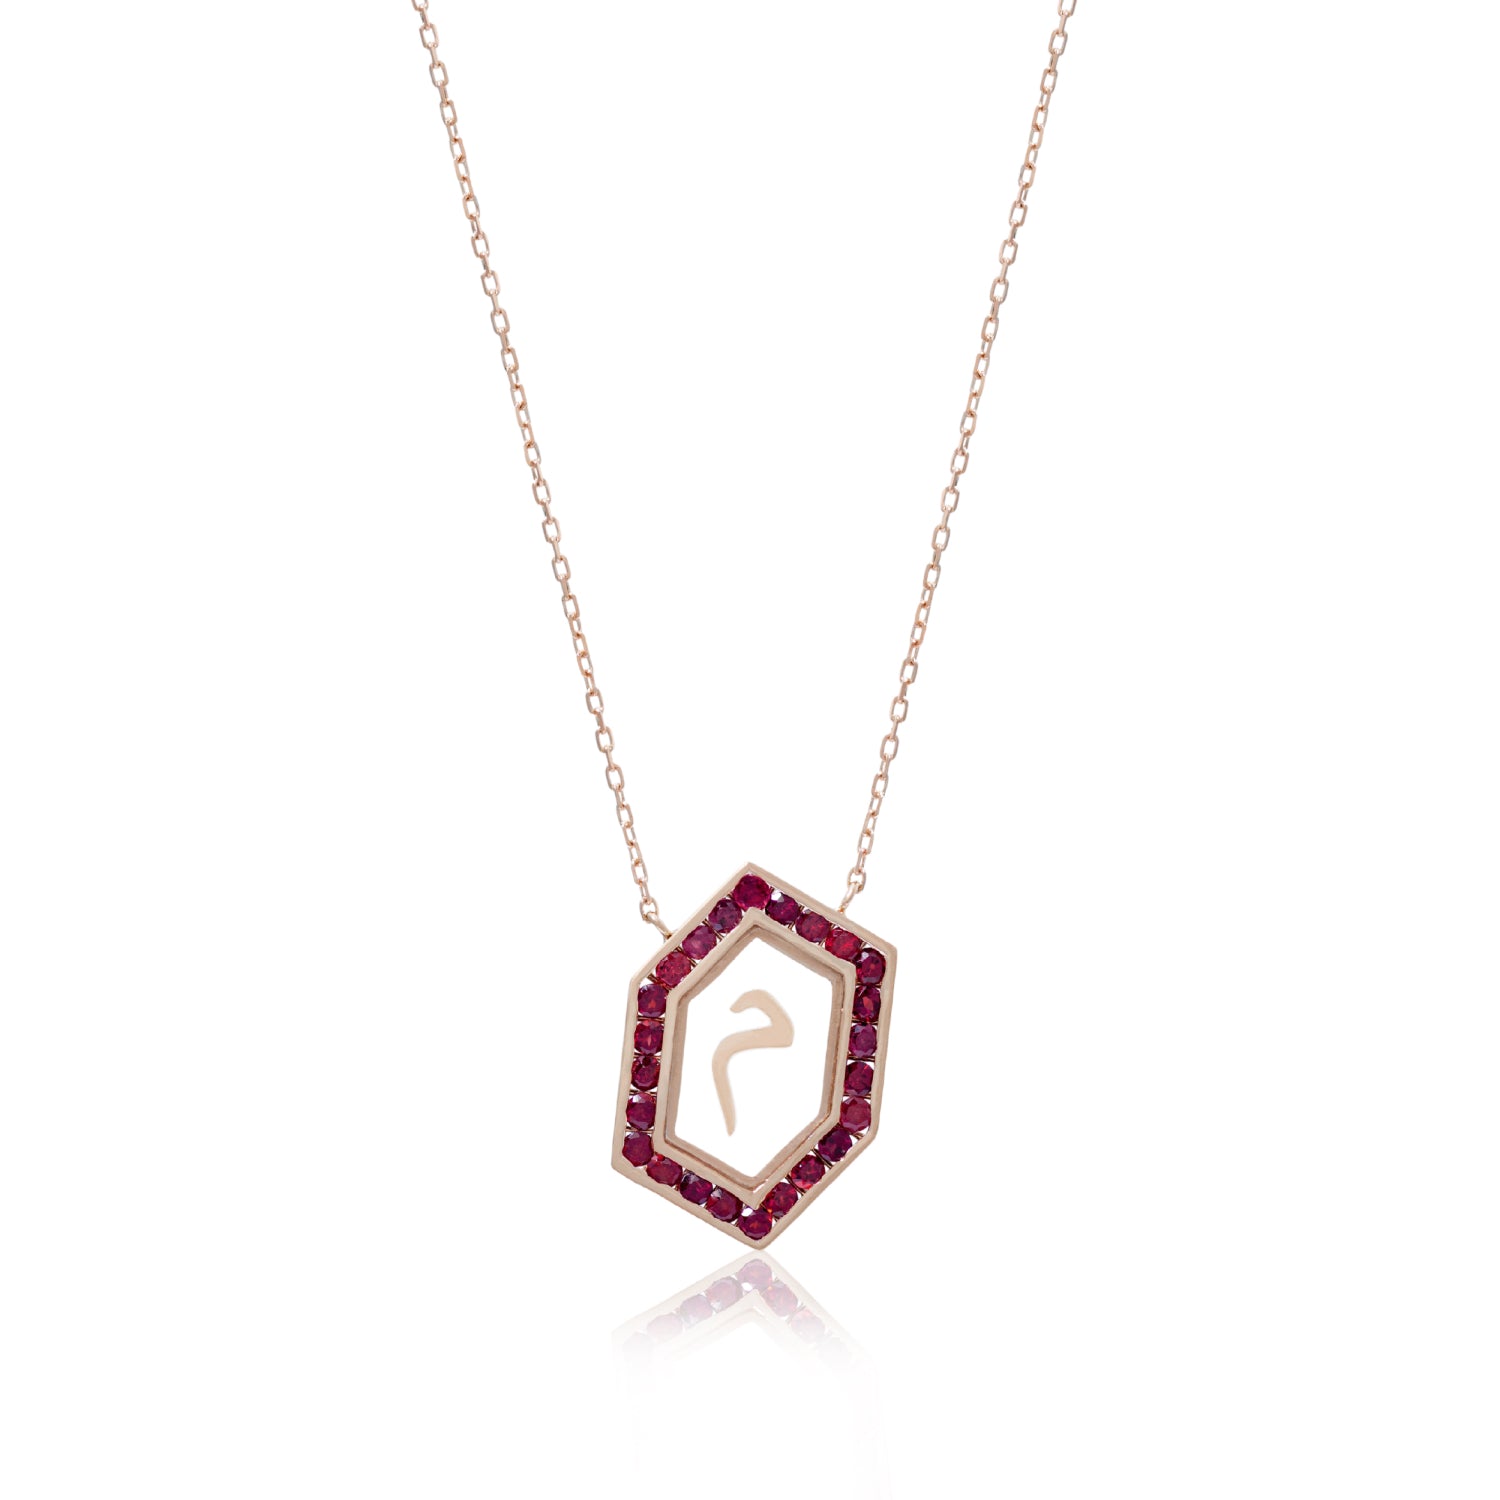 Qamoos 1.0 Letter م Ruby Necklace in Rose Gold